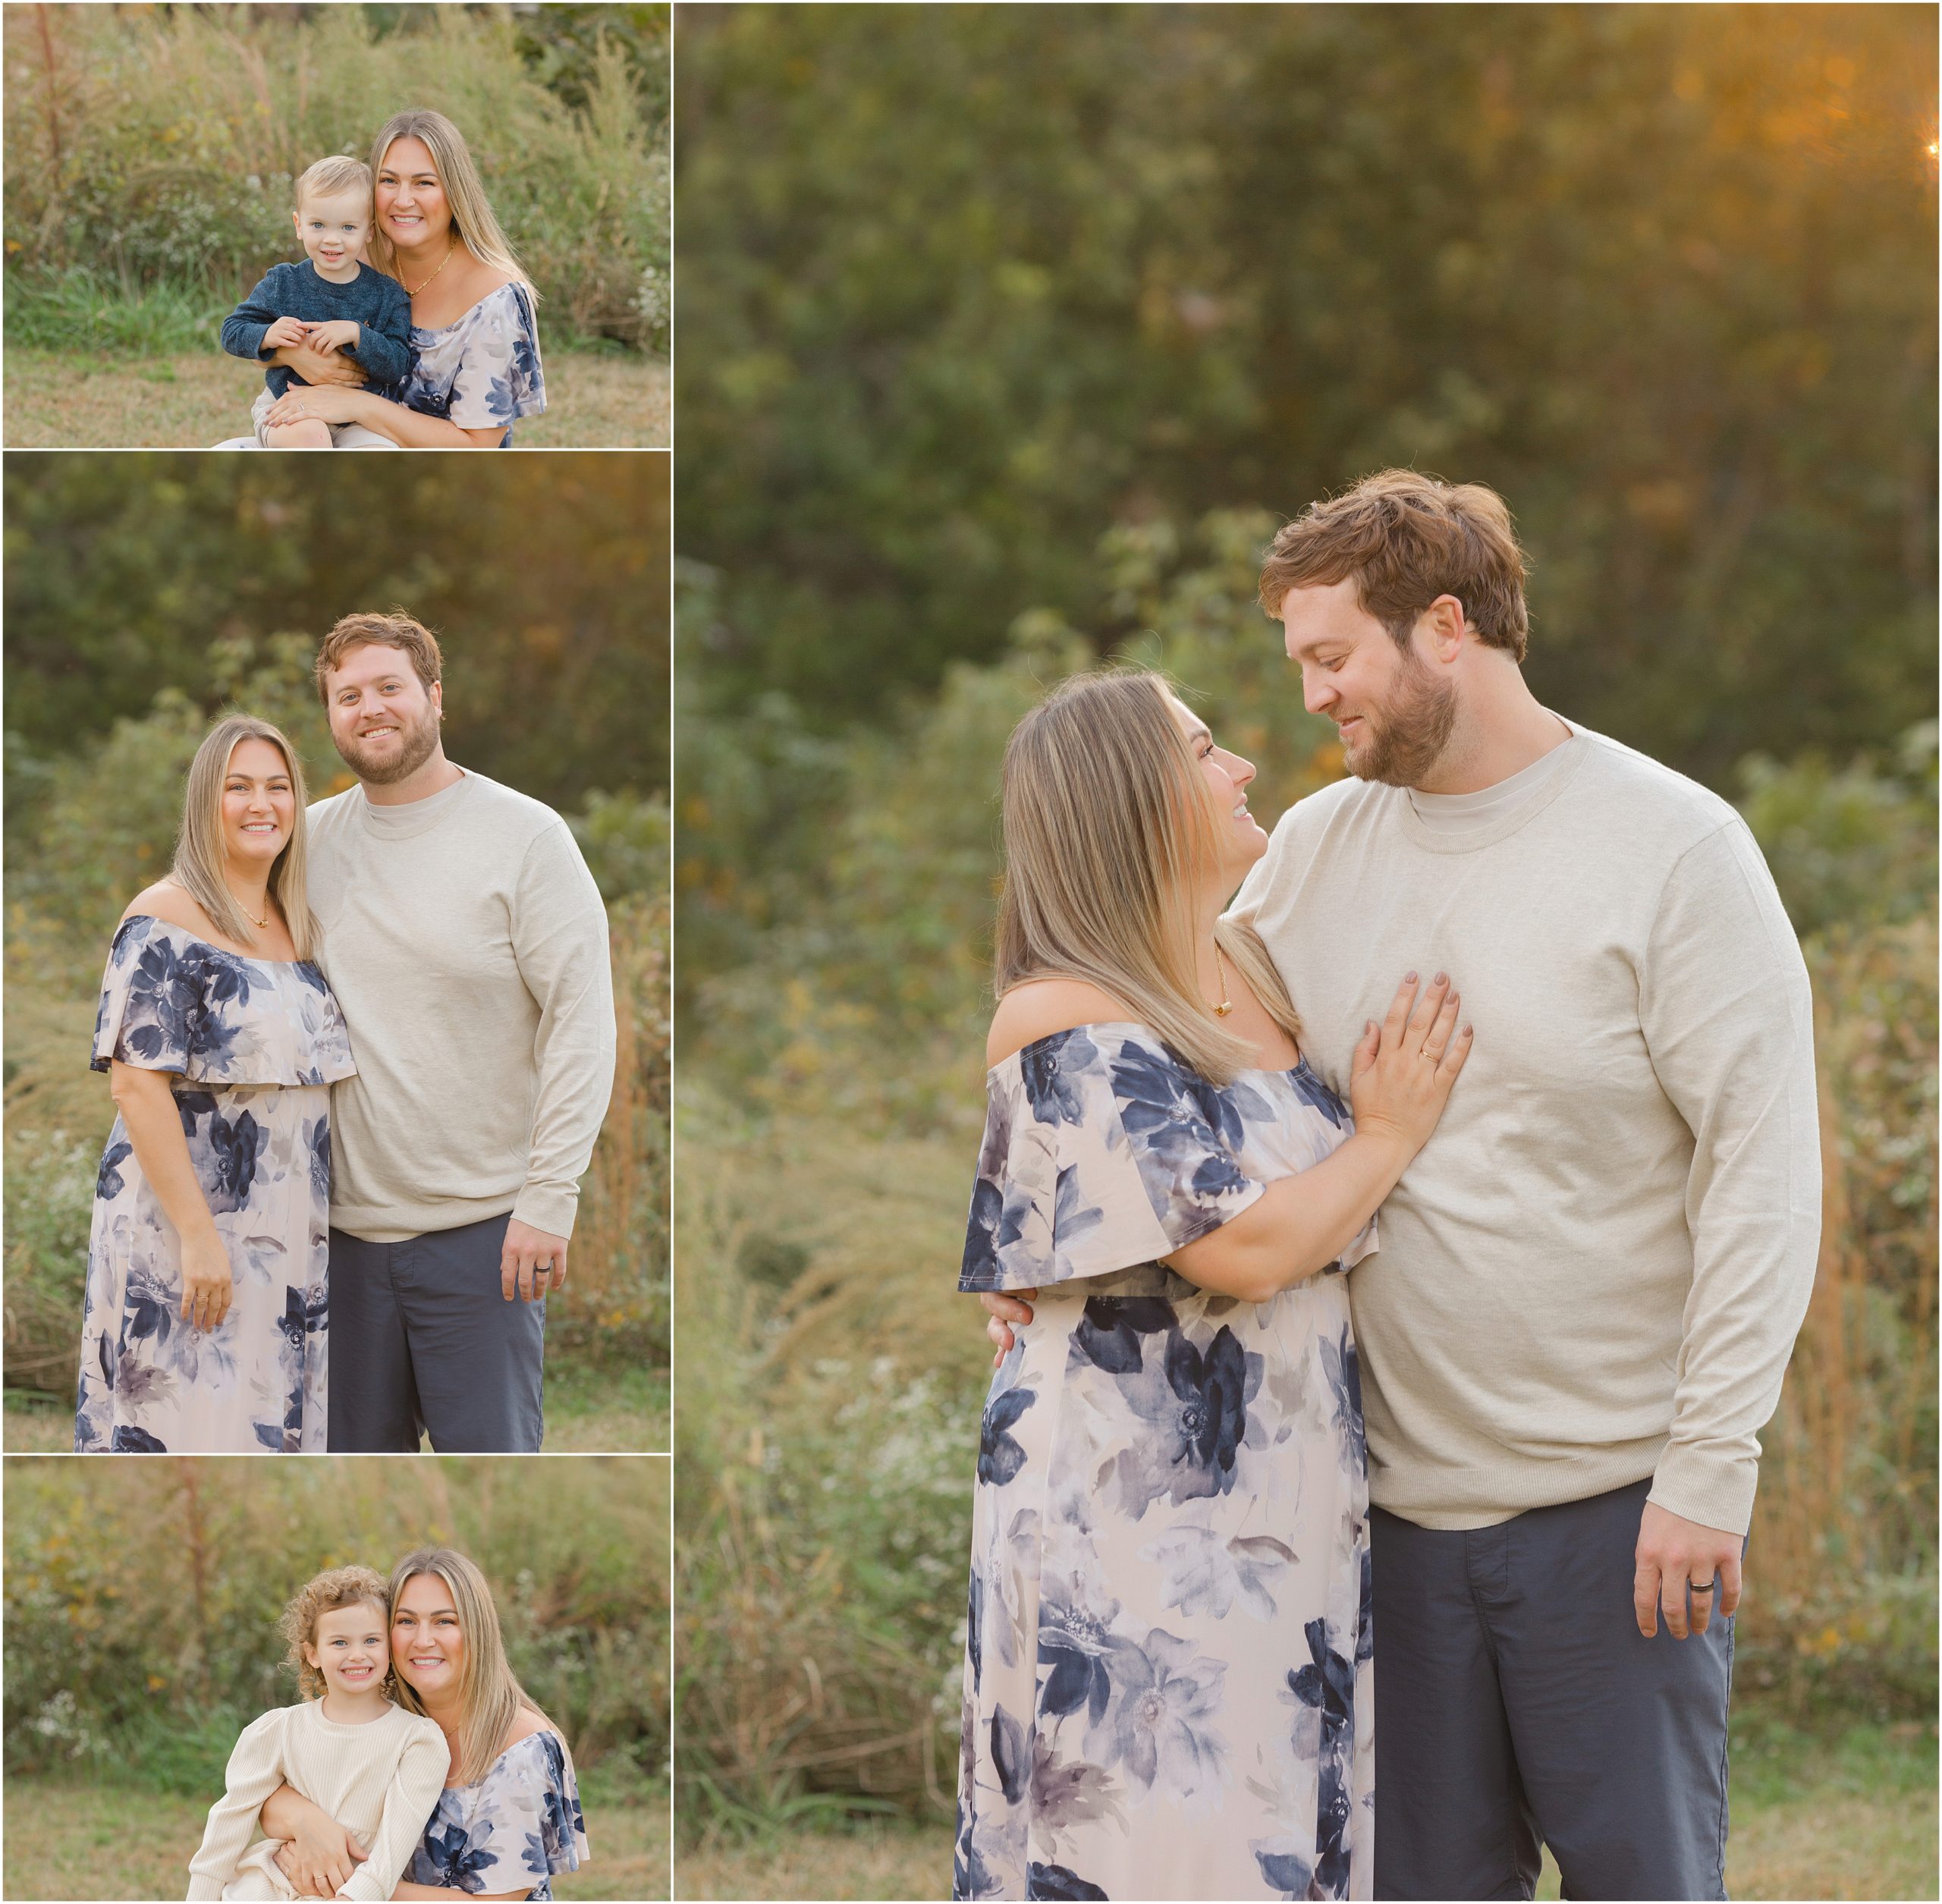 Fall Family Mini Sessions | Raleigh Family Photography | Christy Johnson Photography